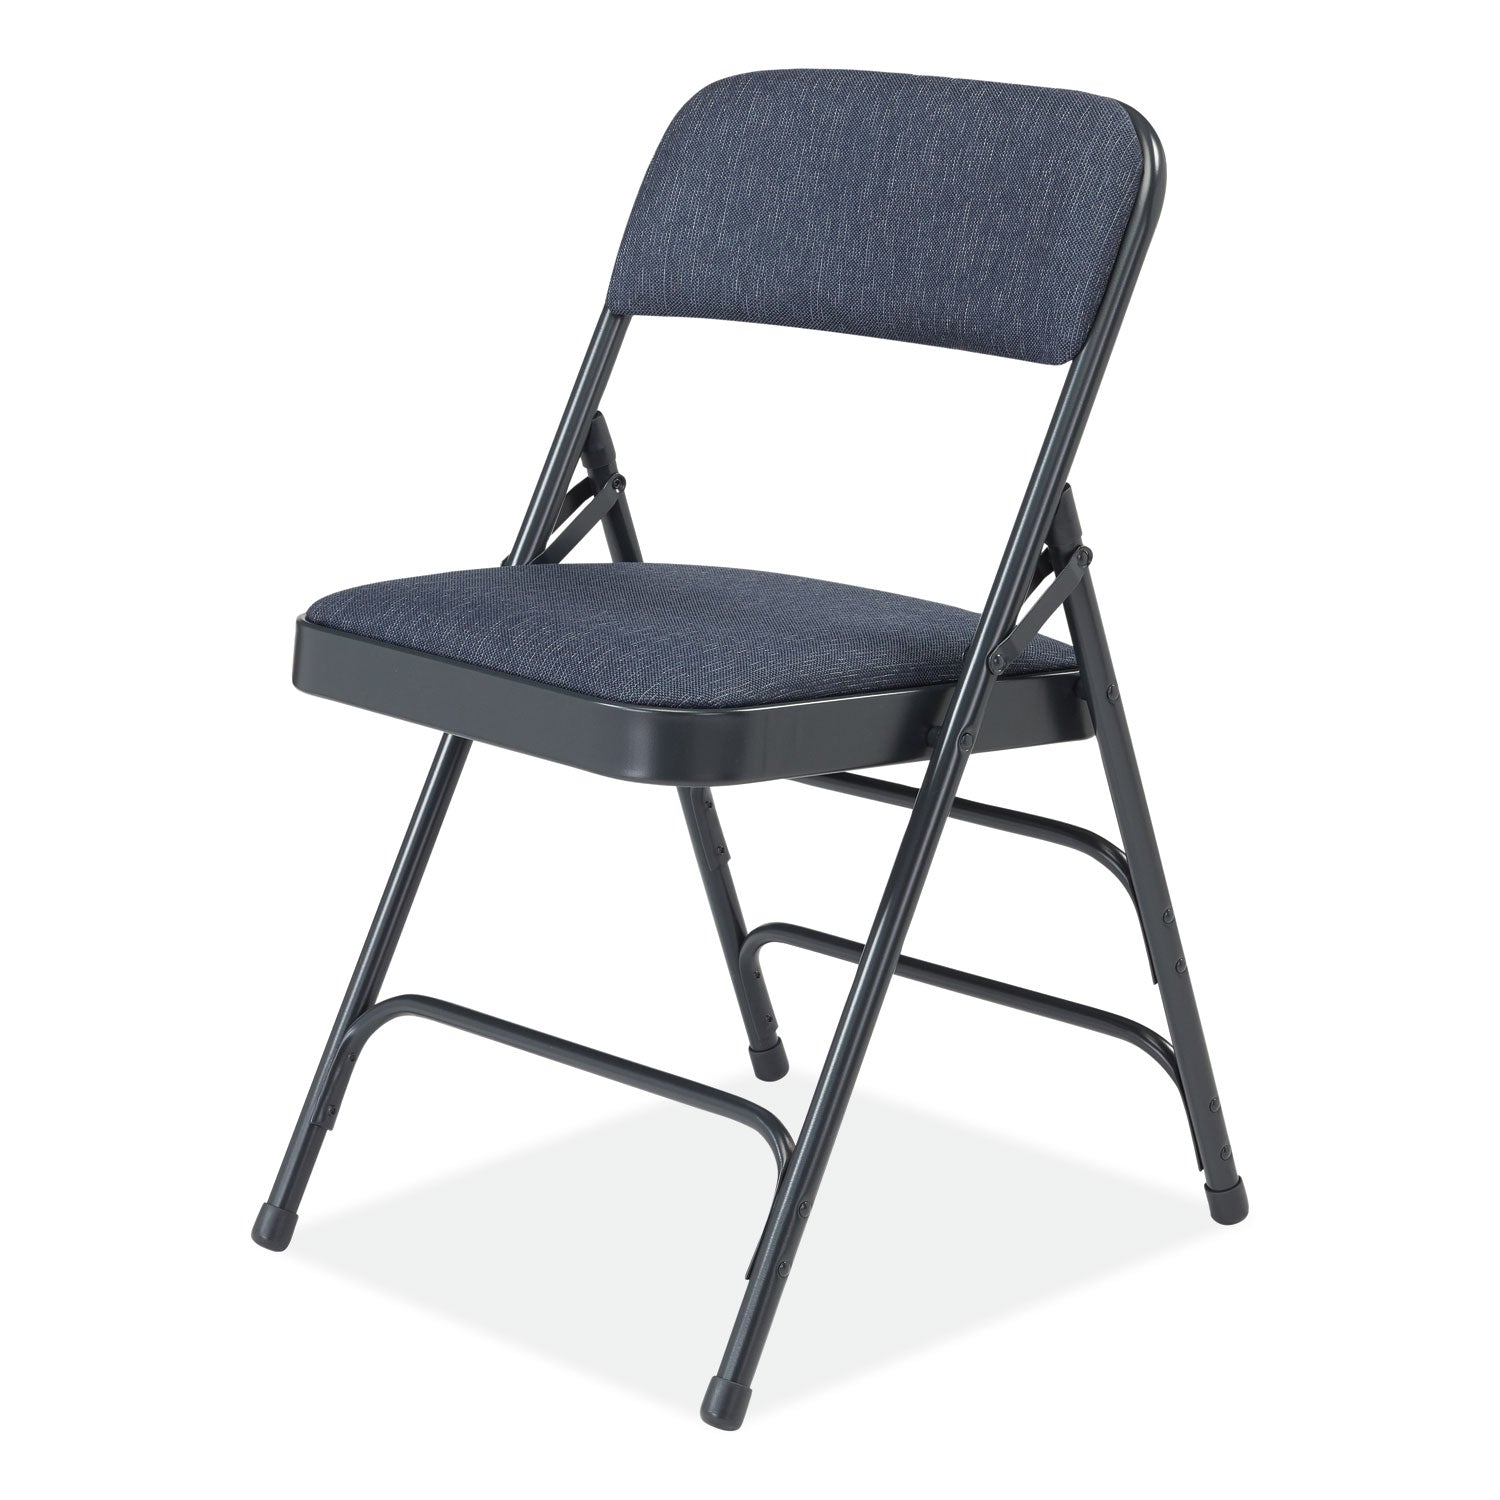 2300-series-deluxe-fabric-upholstered-triple-brace-folding-chair-supports-500-lb-imperial-blue-4-ct-ships-in-1-3-bus-days_nps2304 - 3